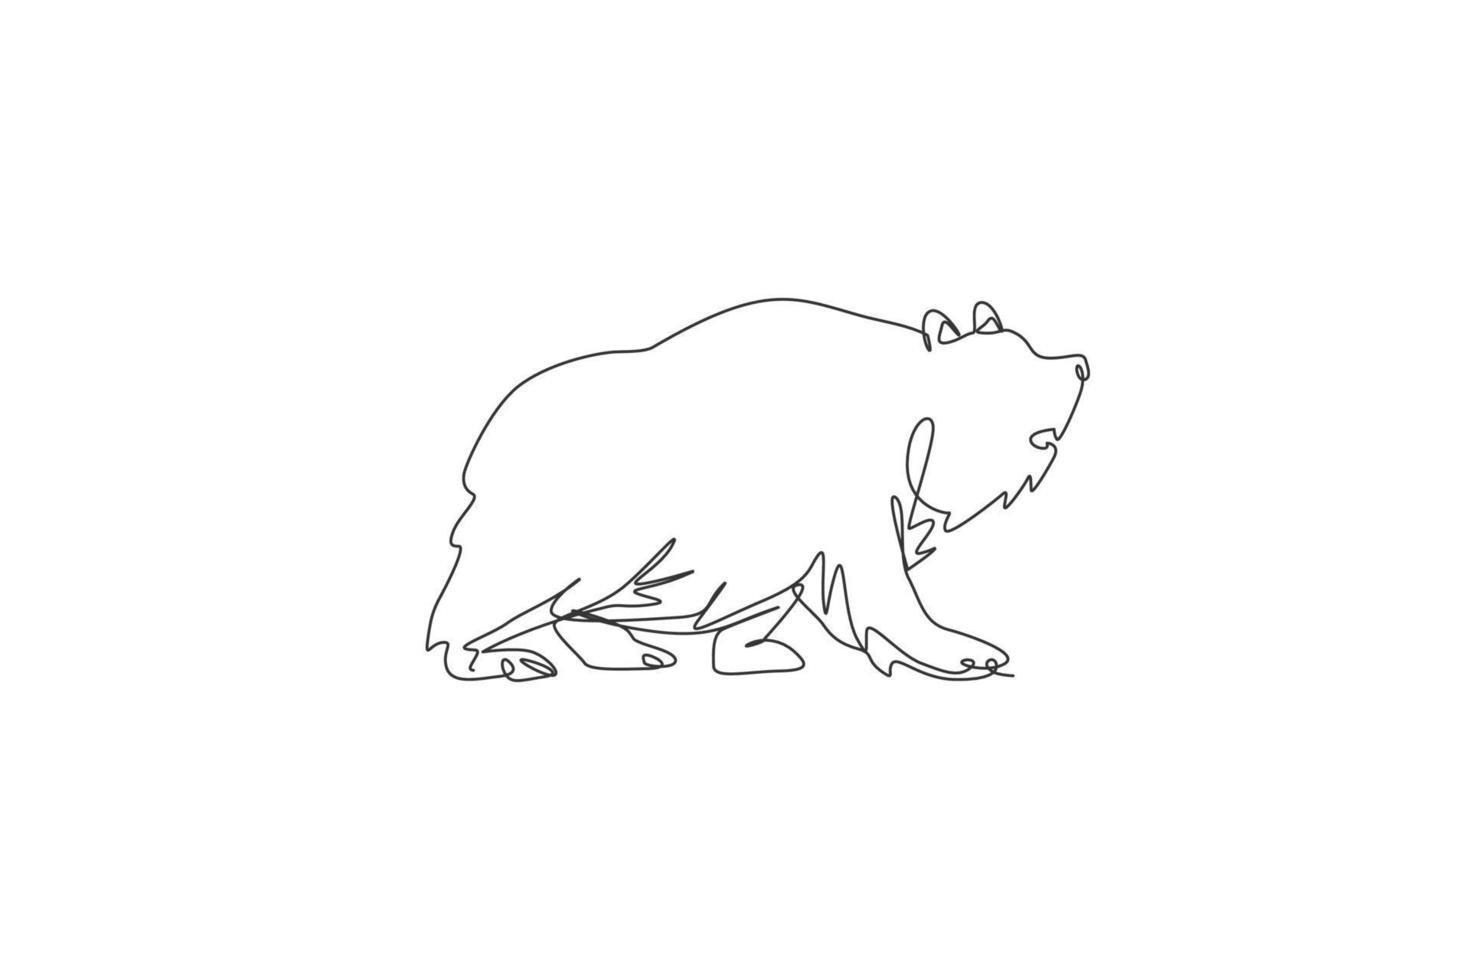 One single line drawing of big grizzly bear vector illustration. Protected species national park conservation. Safari zoo concept. Modern continuous line graphic draw design